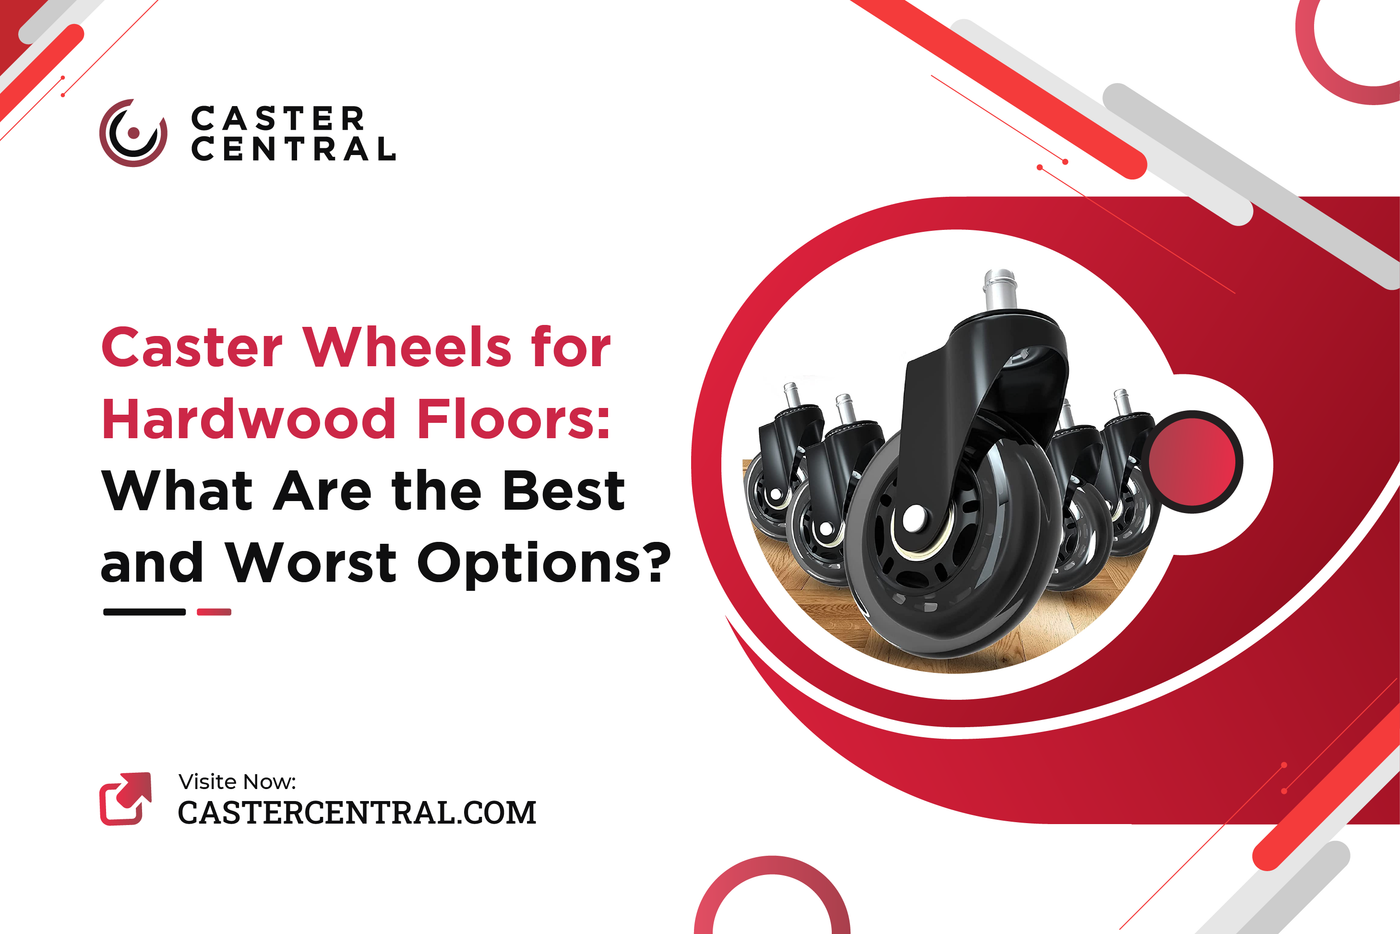 Caster Wheels for Hardwood Floors: What Are the Best and Worst Options?